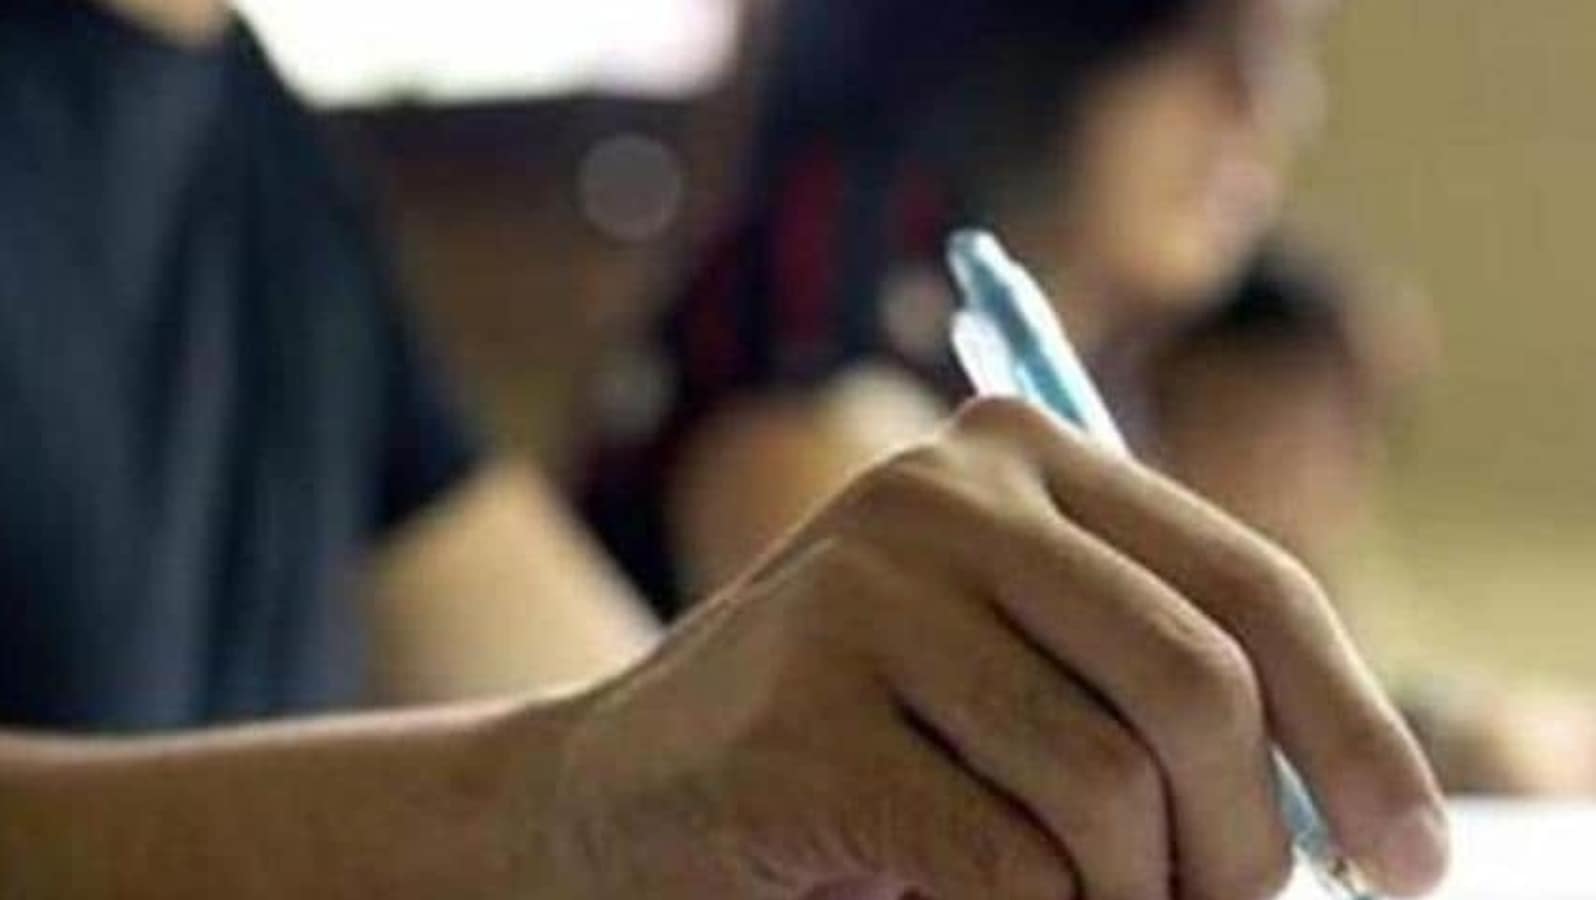 HPPSC Exams 2021: HPAS Main, AE, RFO and other exam dates released